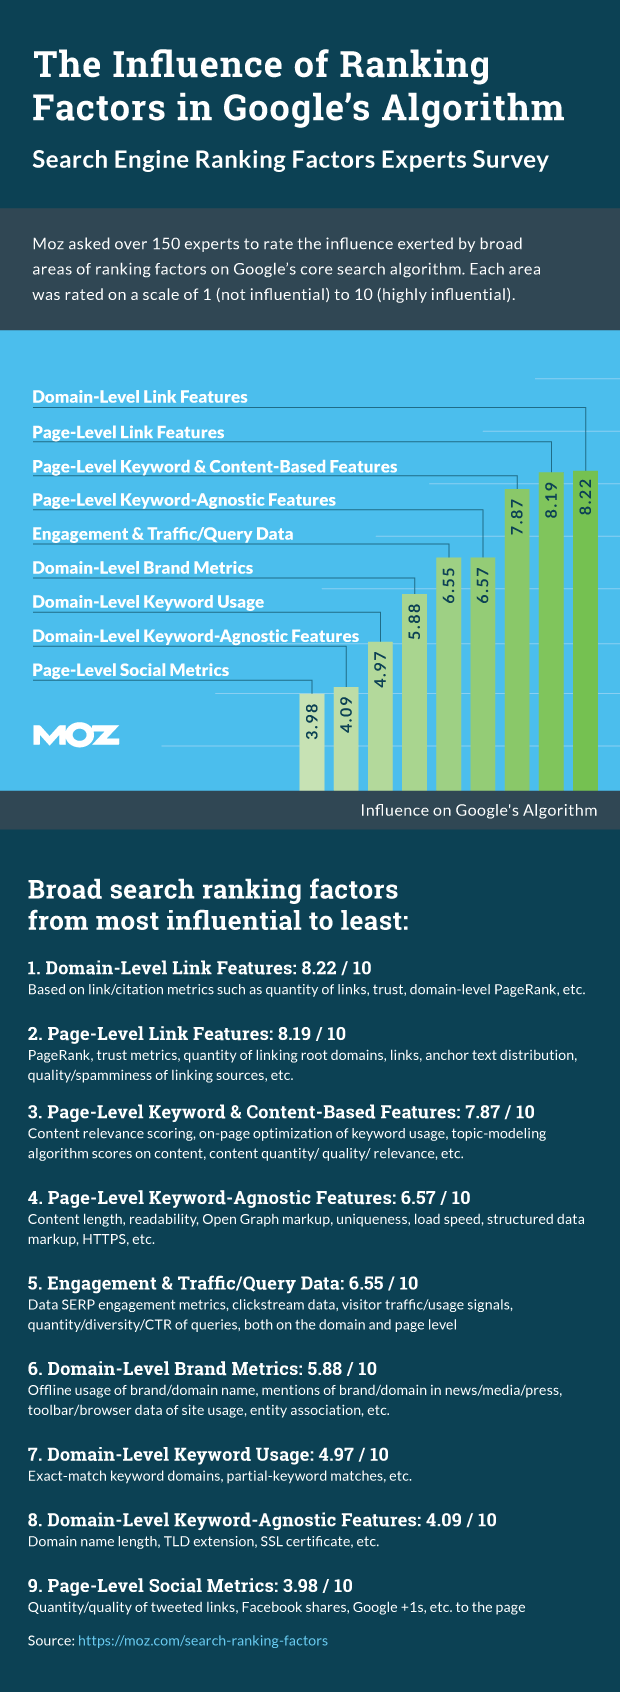 Search Engine Ranking Factors 2015